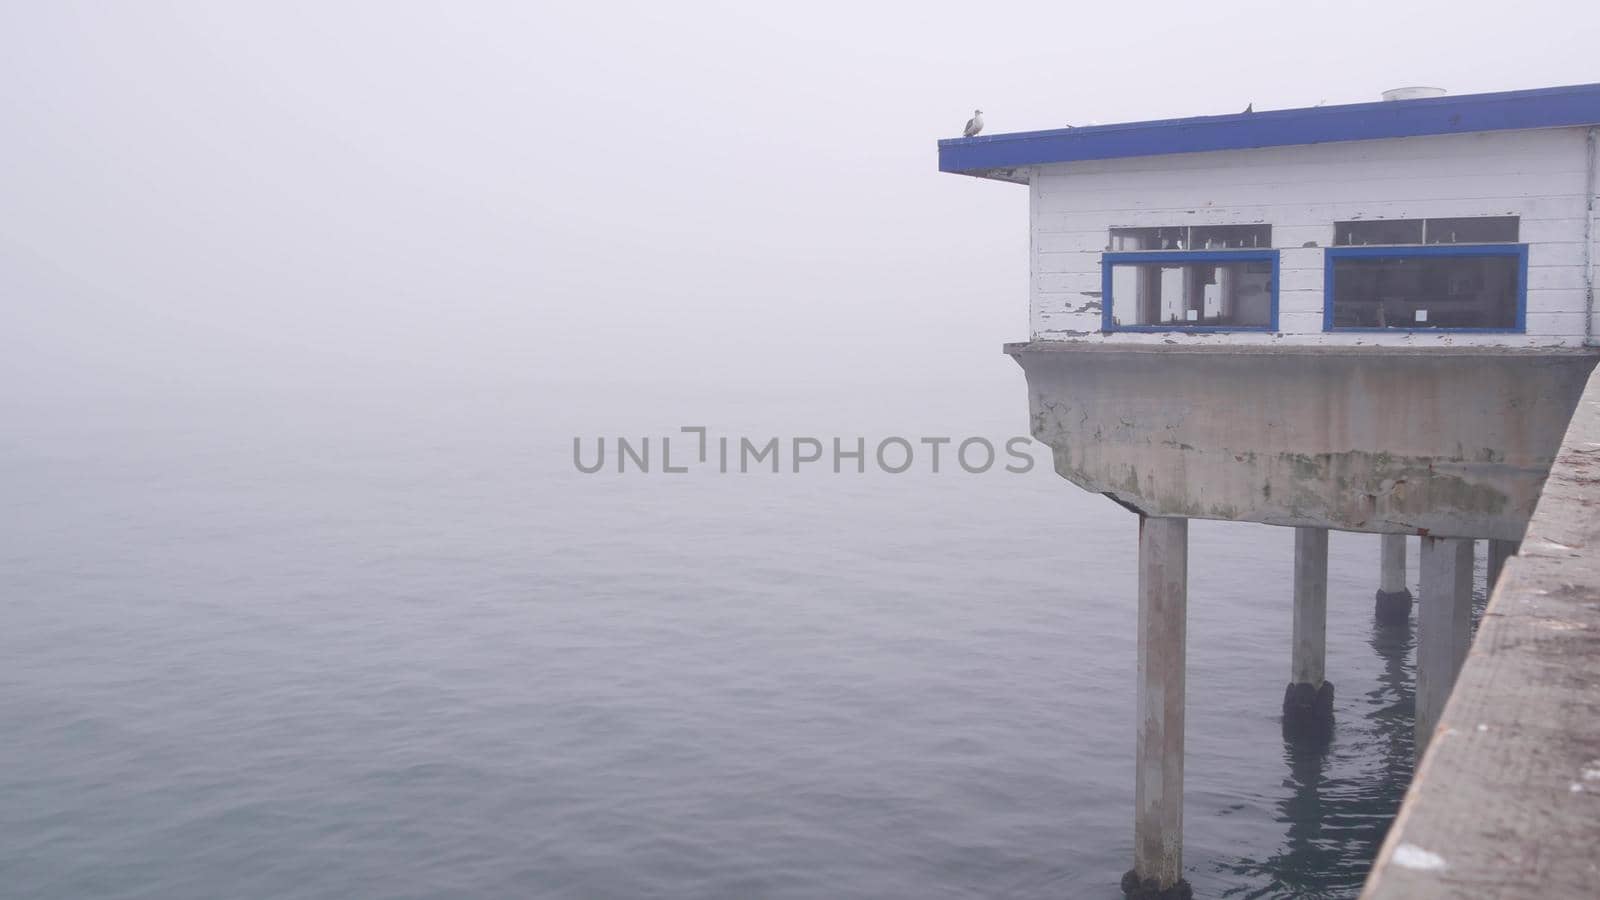 Wooden house on piles, water surface in haze, Ocean Beach pier, foggy California coast, USA. Old abandoned obsolete boardwalk cafe in misty weather. Calm tranquil silent atmosphere on San Diego shore.